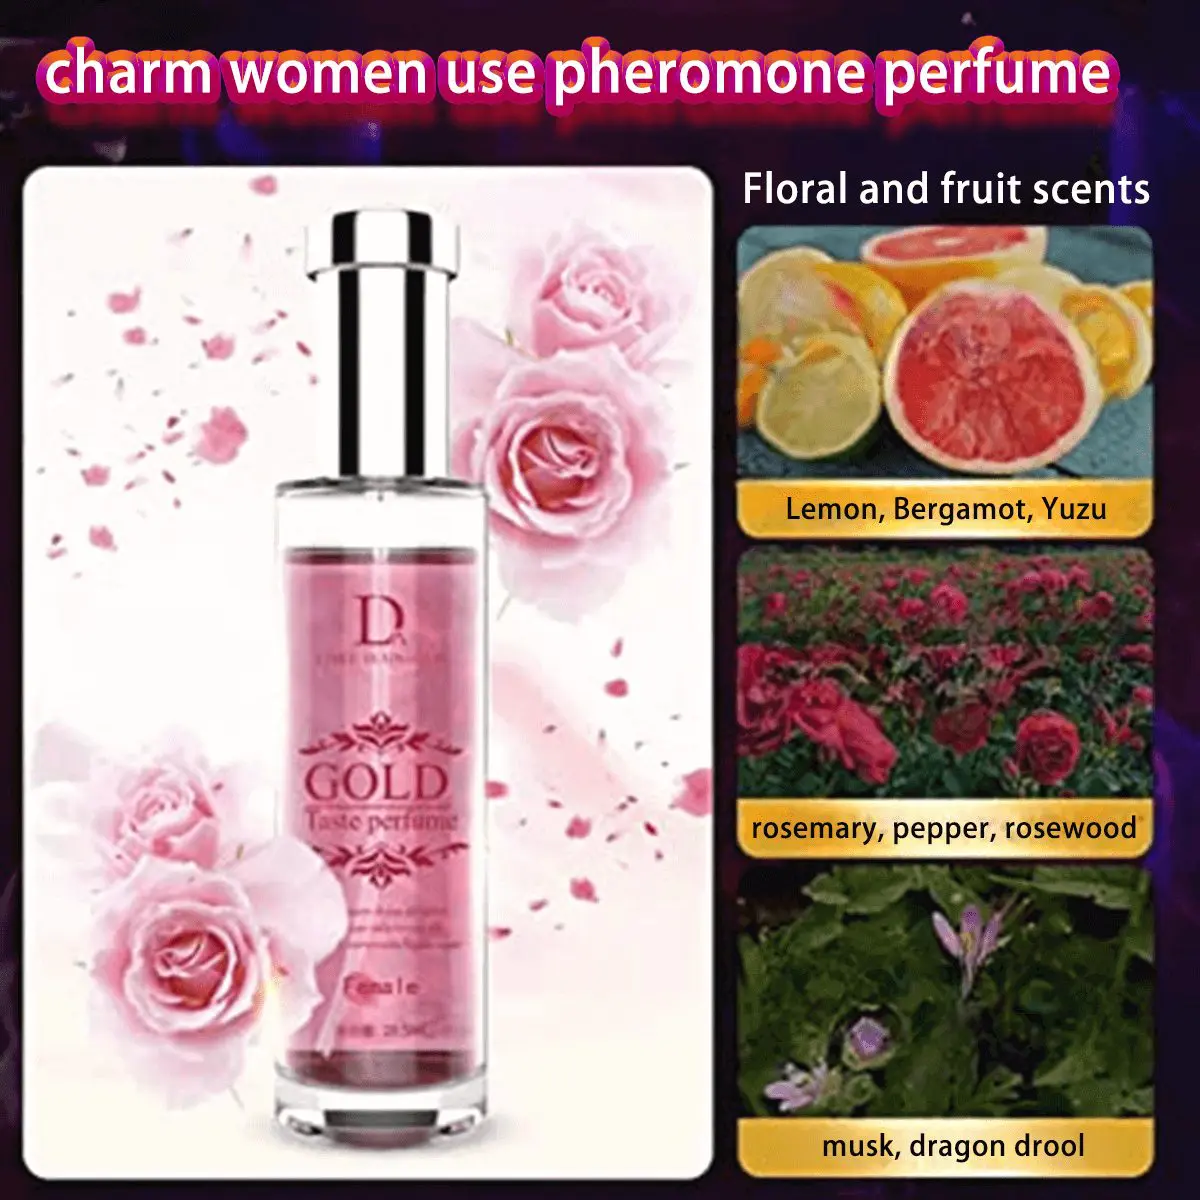 perfume con feromonas para mujer，best perfumes for young girls，pheromones perfumes for women，perfume de feromonas para atraer mujeres，perfumeria de mujer con feromona，pheromone perfume for women tiktok，perfume con feromonas para atraer mujeres